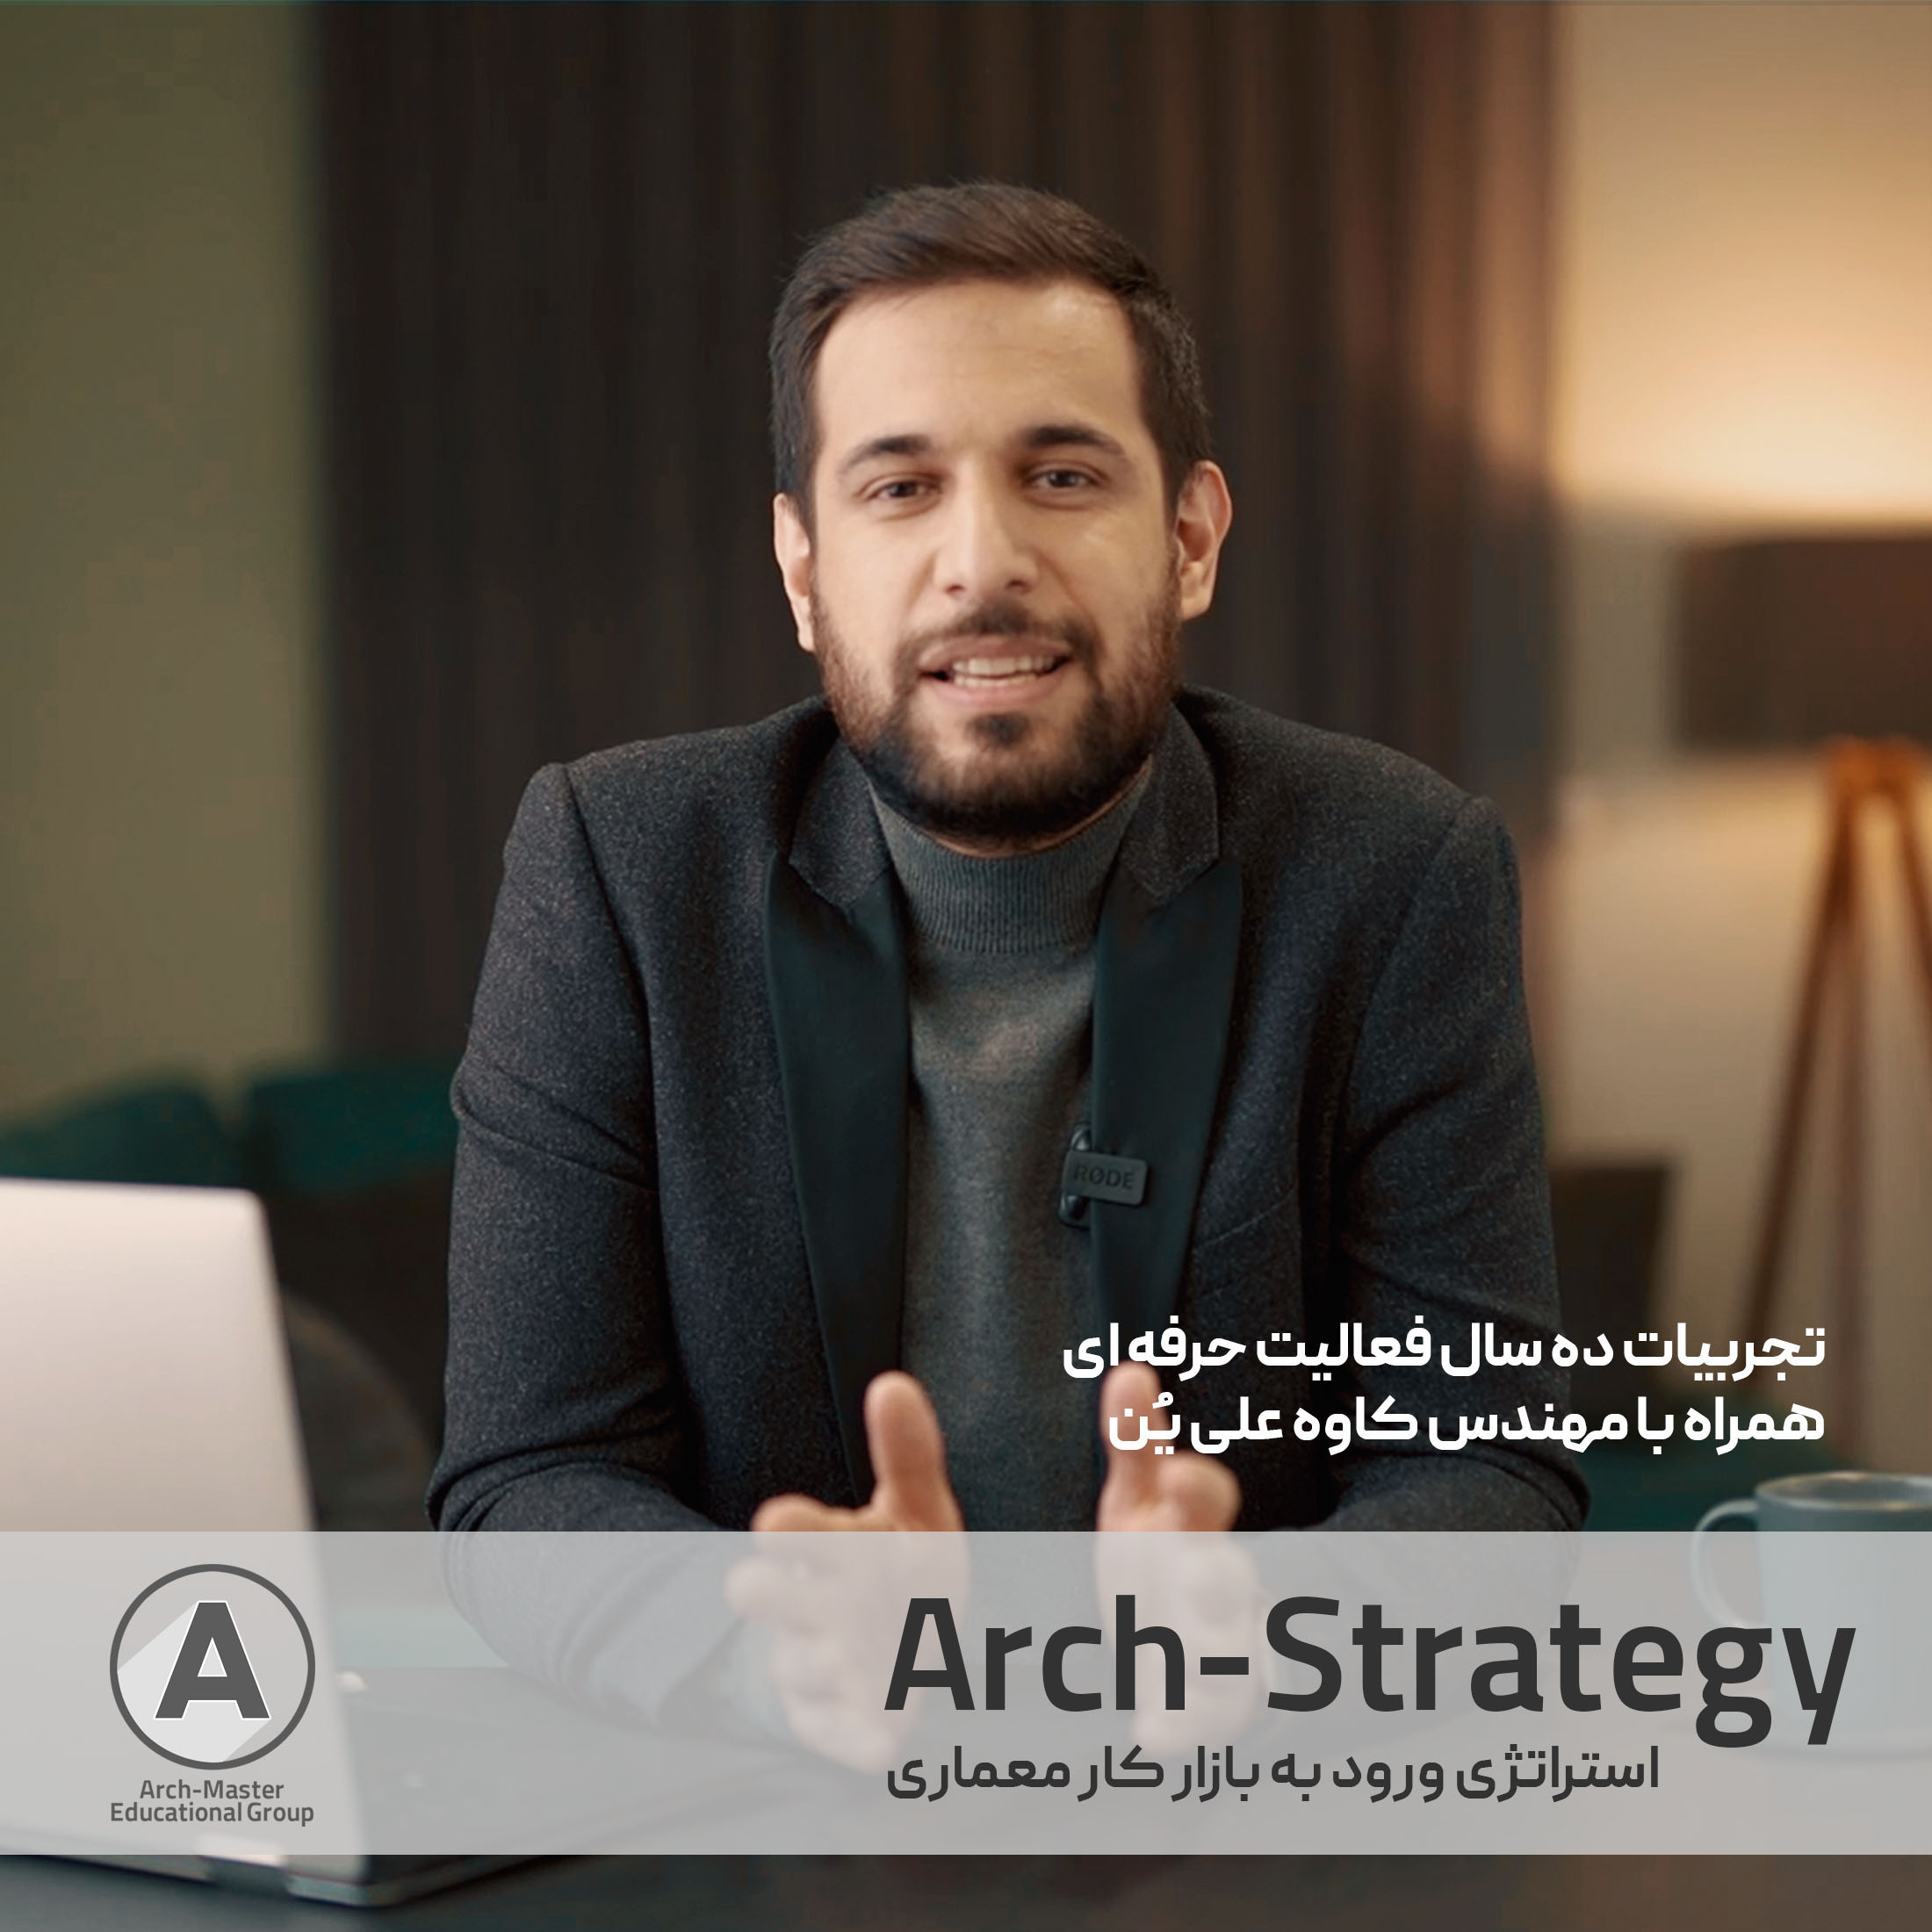 Arch-Strategy